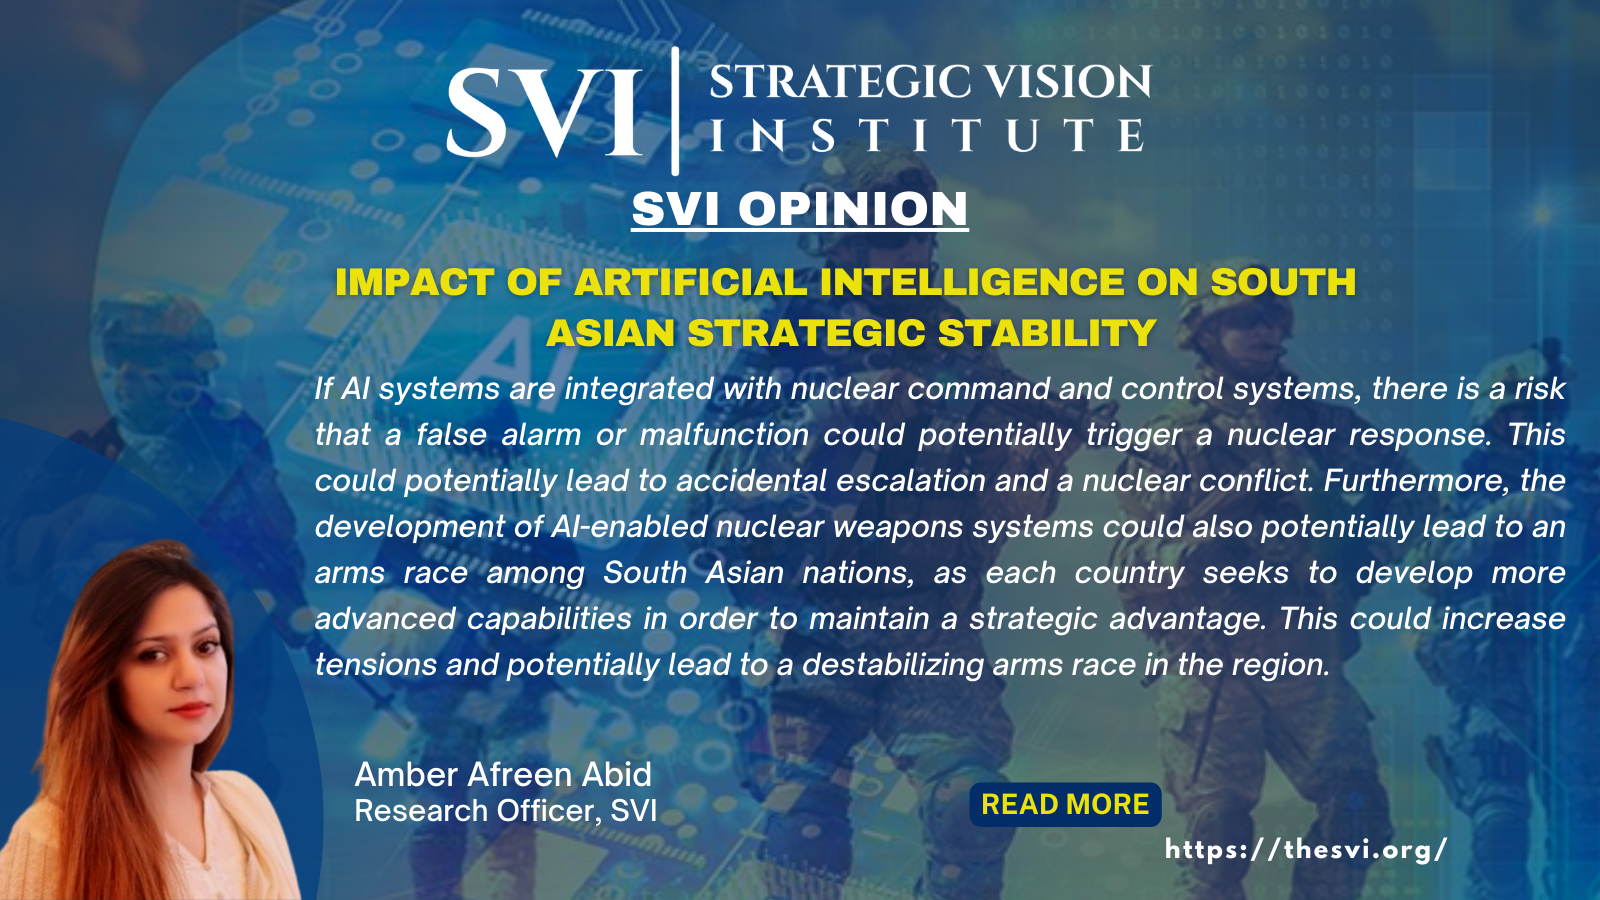 Impact of Artificial Intelligence on South Asian Strategic Stability